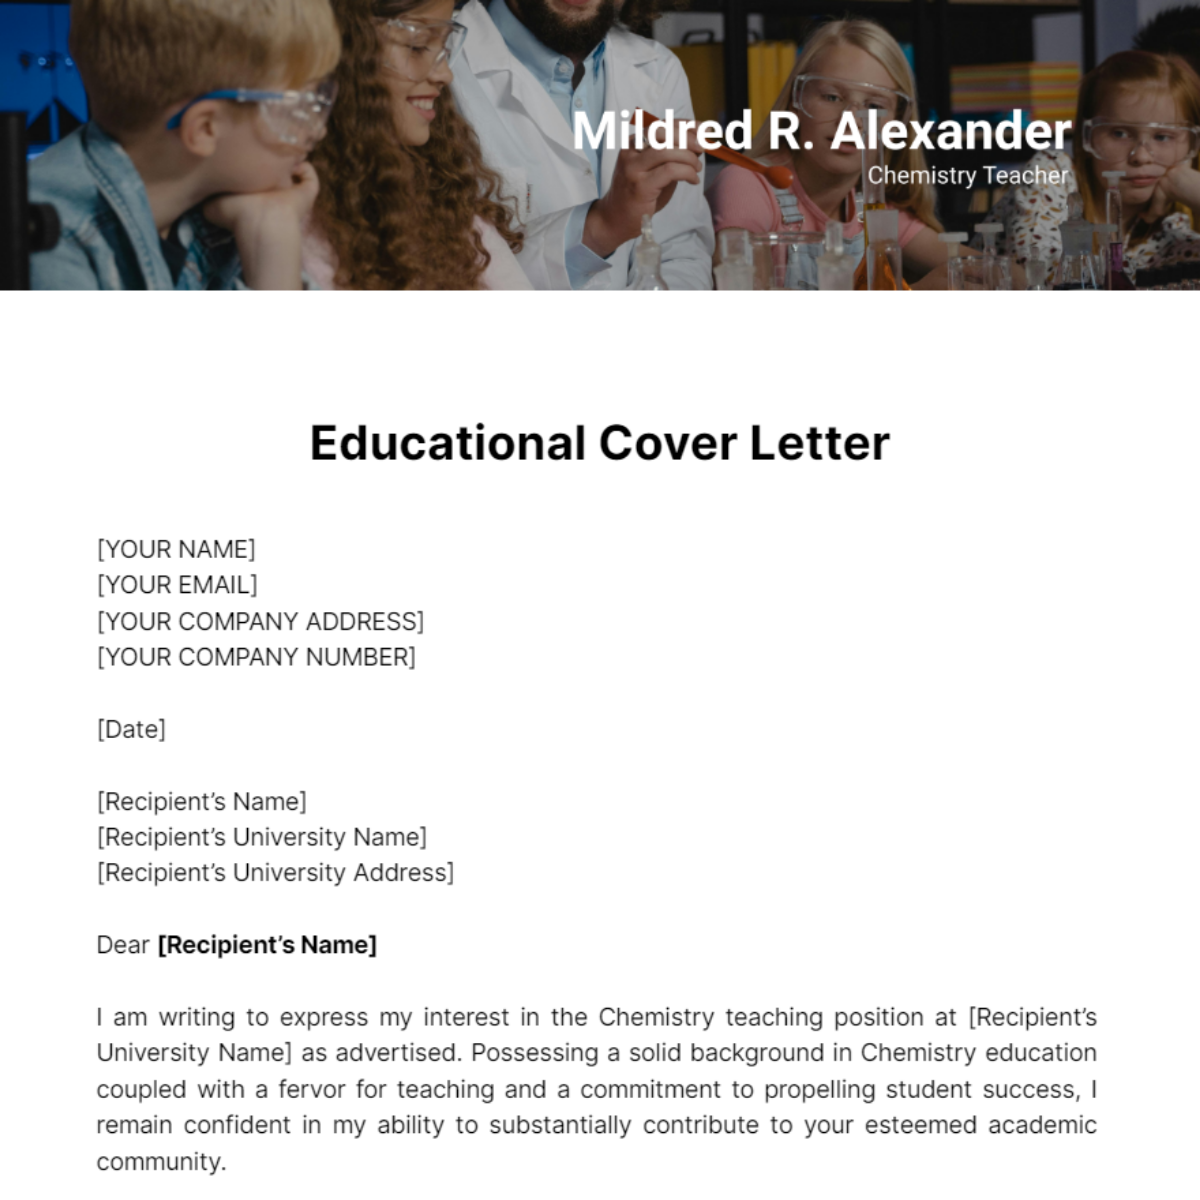 Educational Cover Letter Template